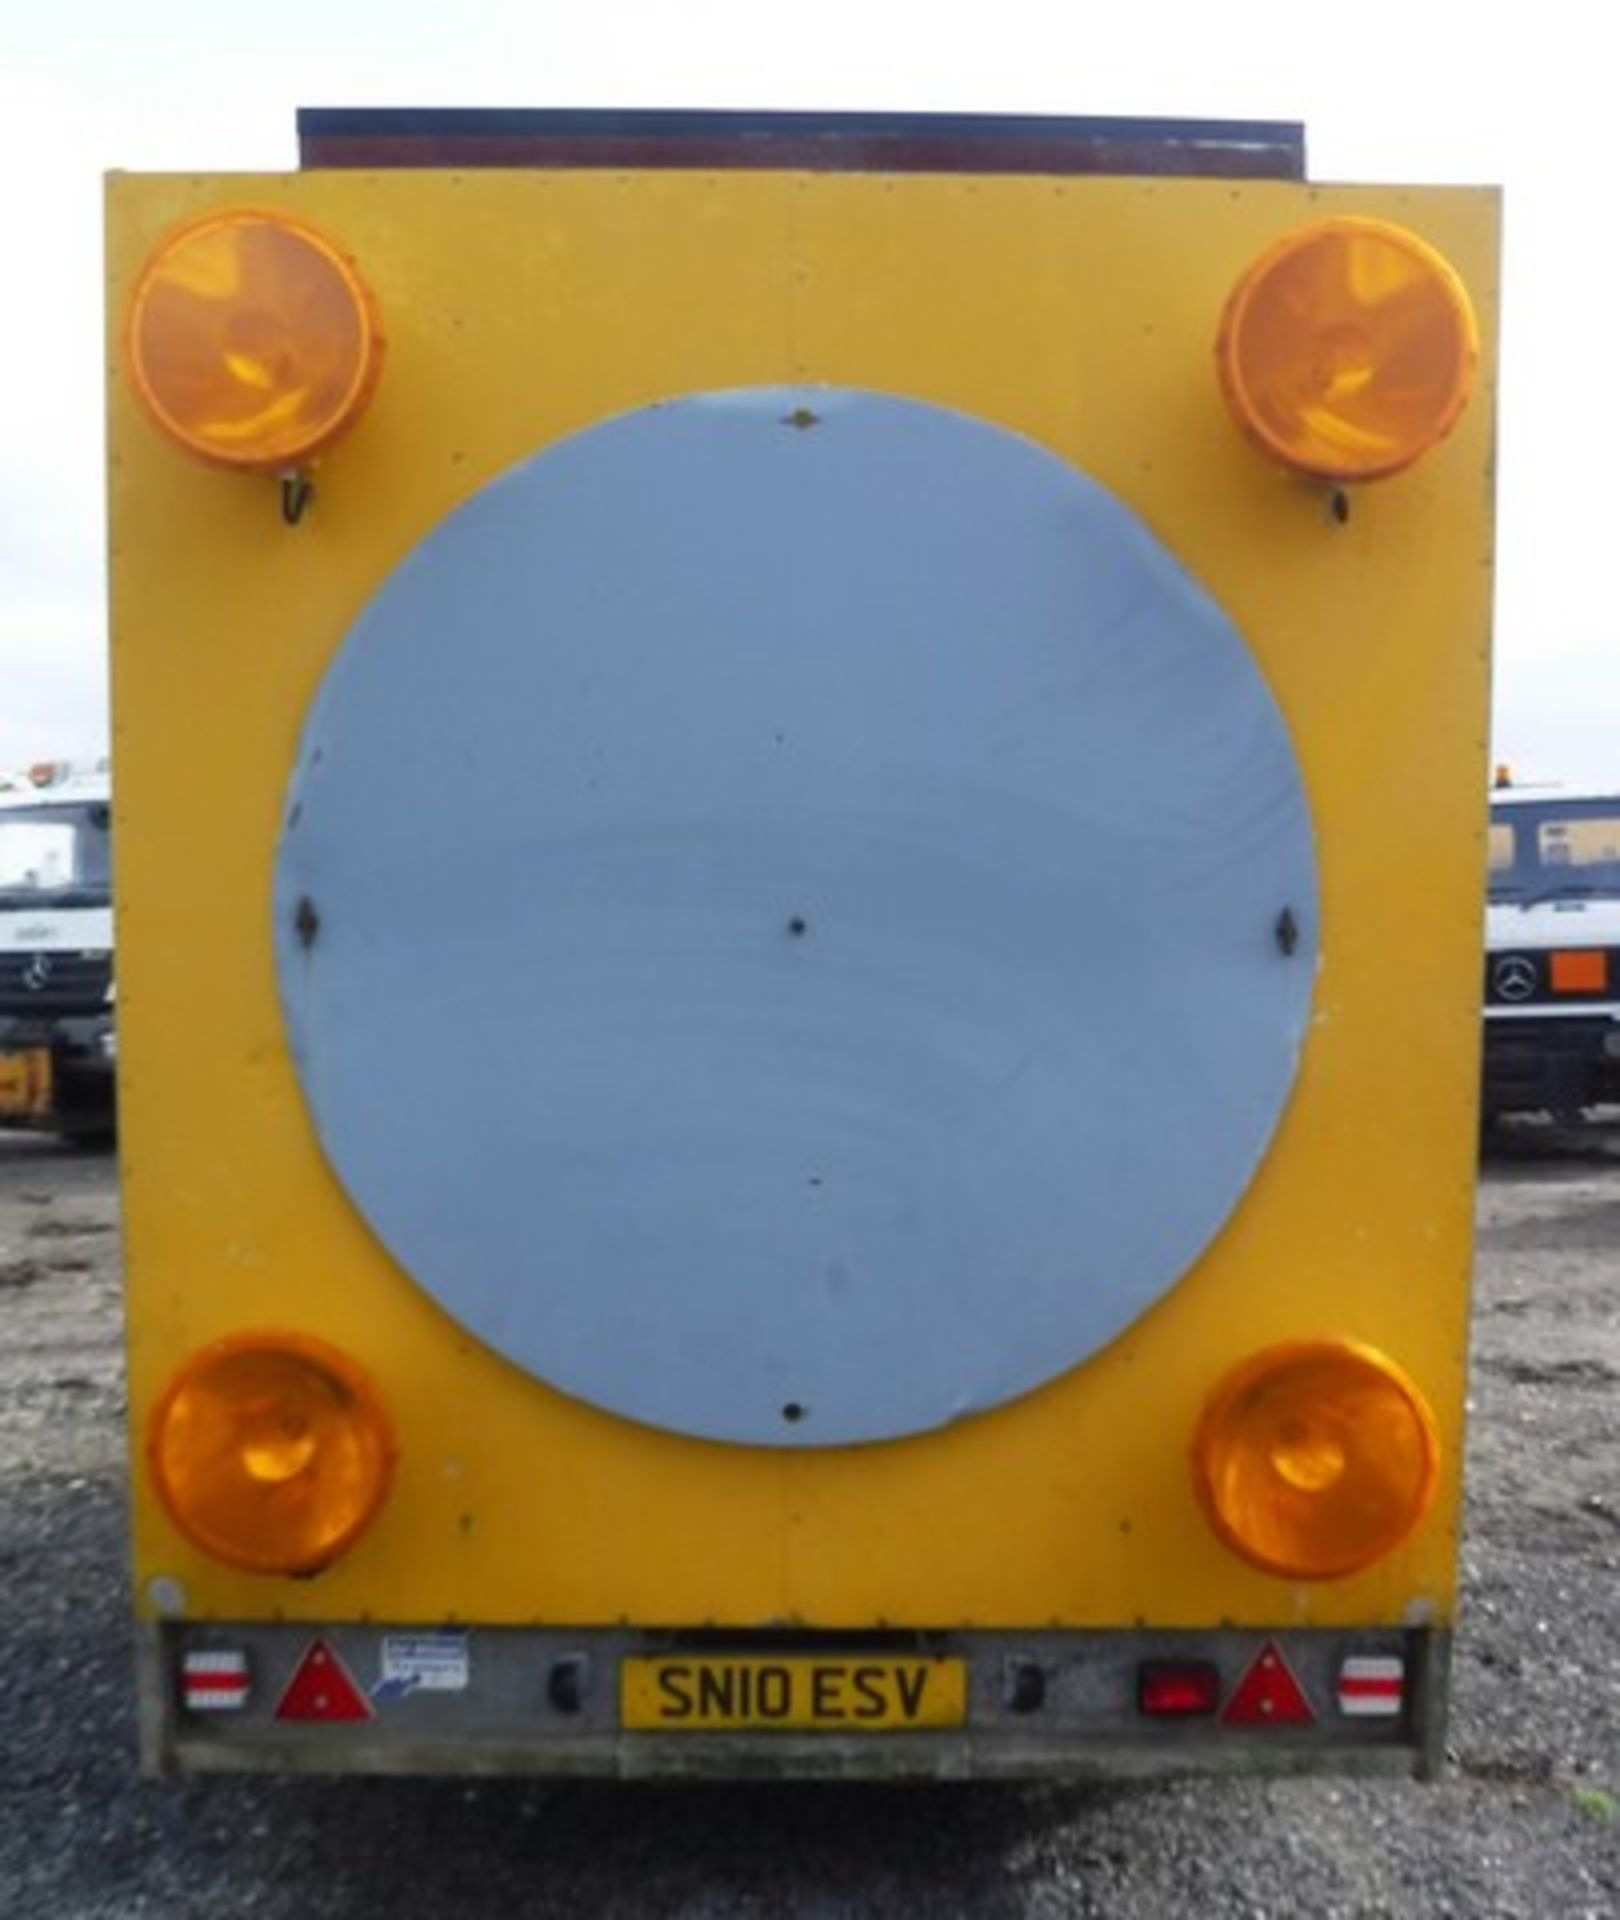 IFOR WILLIAMS TRAILER, 12FT X 6FT, ROAD TRAILER FOR CARRYING SIGN, ASSET T-1G101 - Image 3 of 6